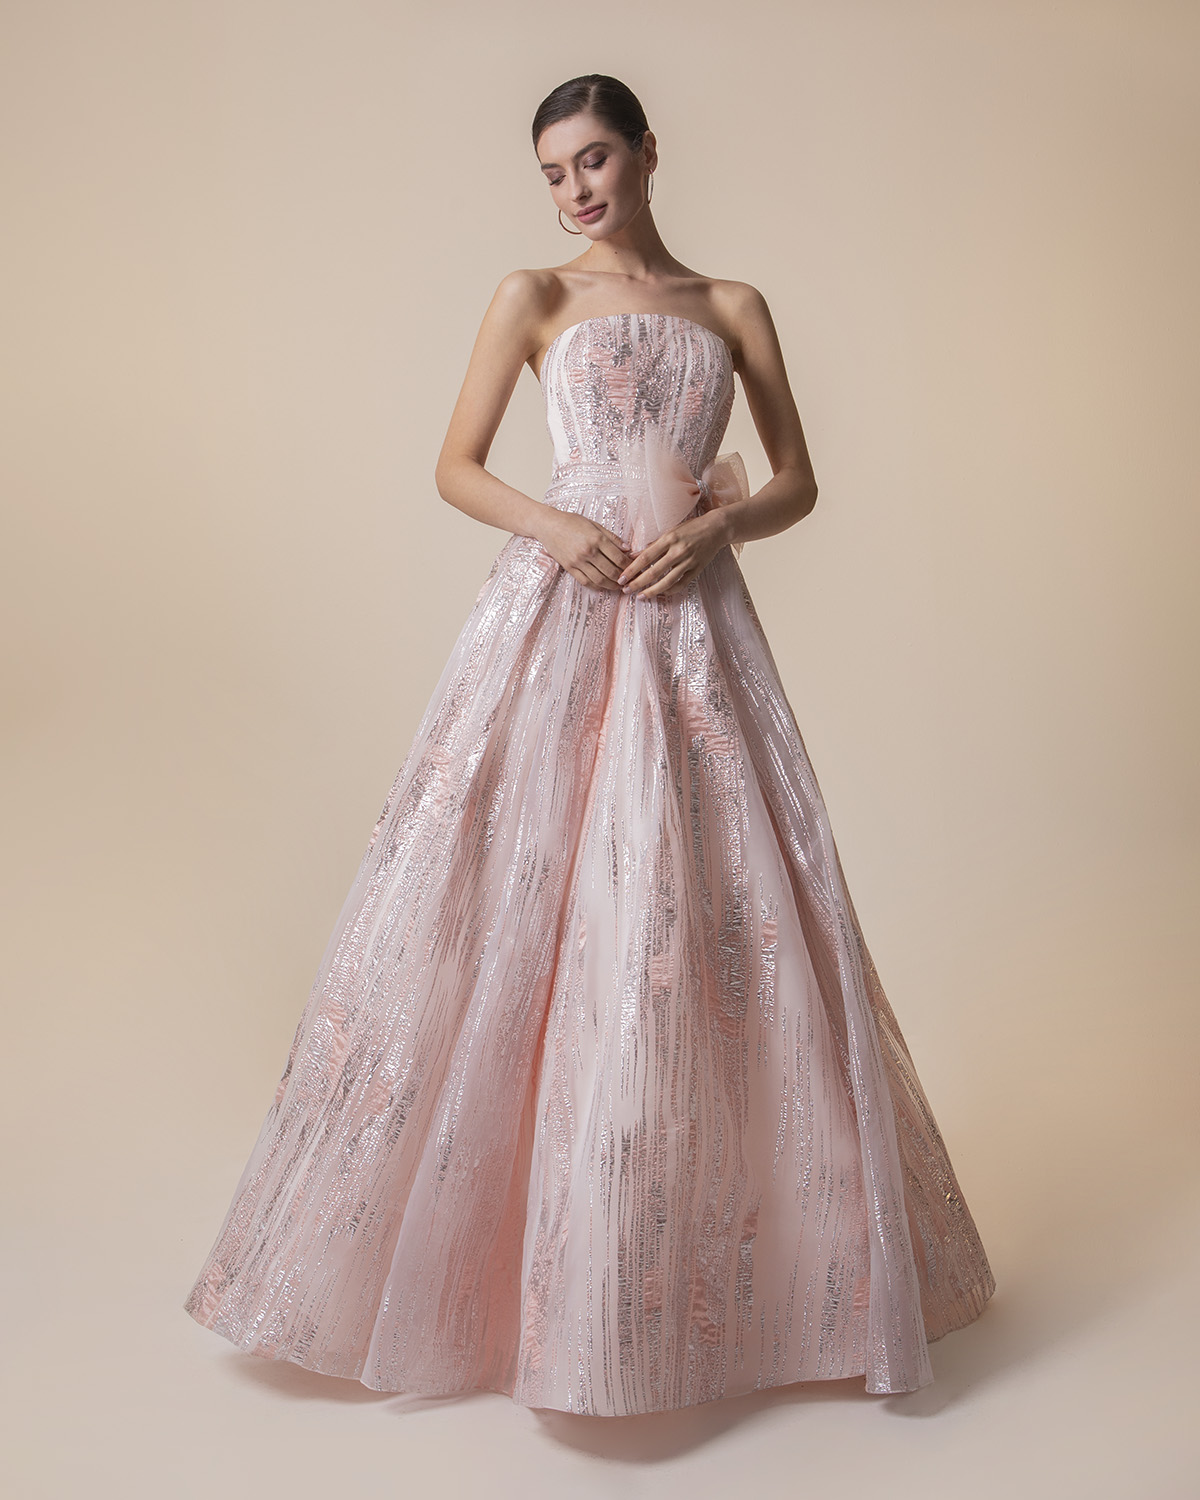 Evening Dresses / Long strapless evening dress with shining fabric and a big bow on the waist